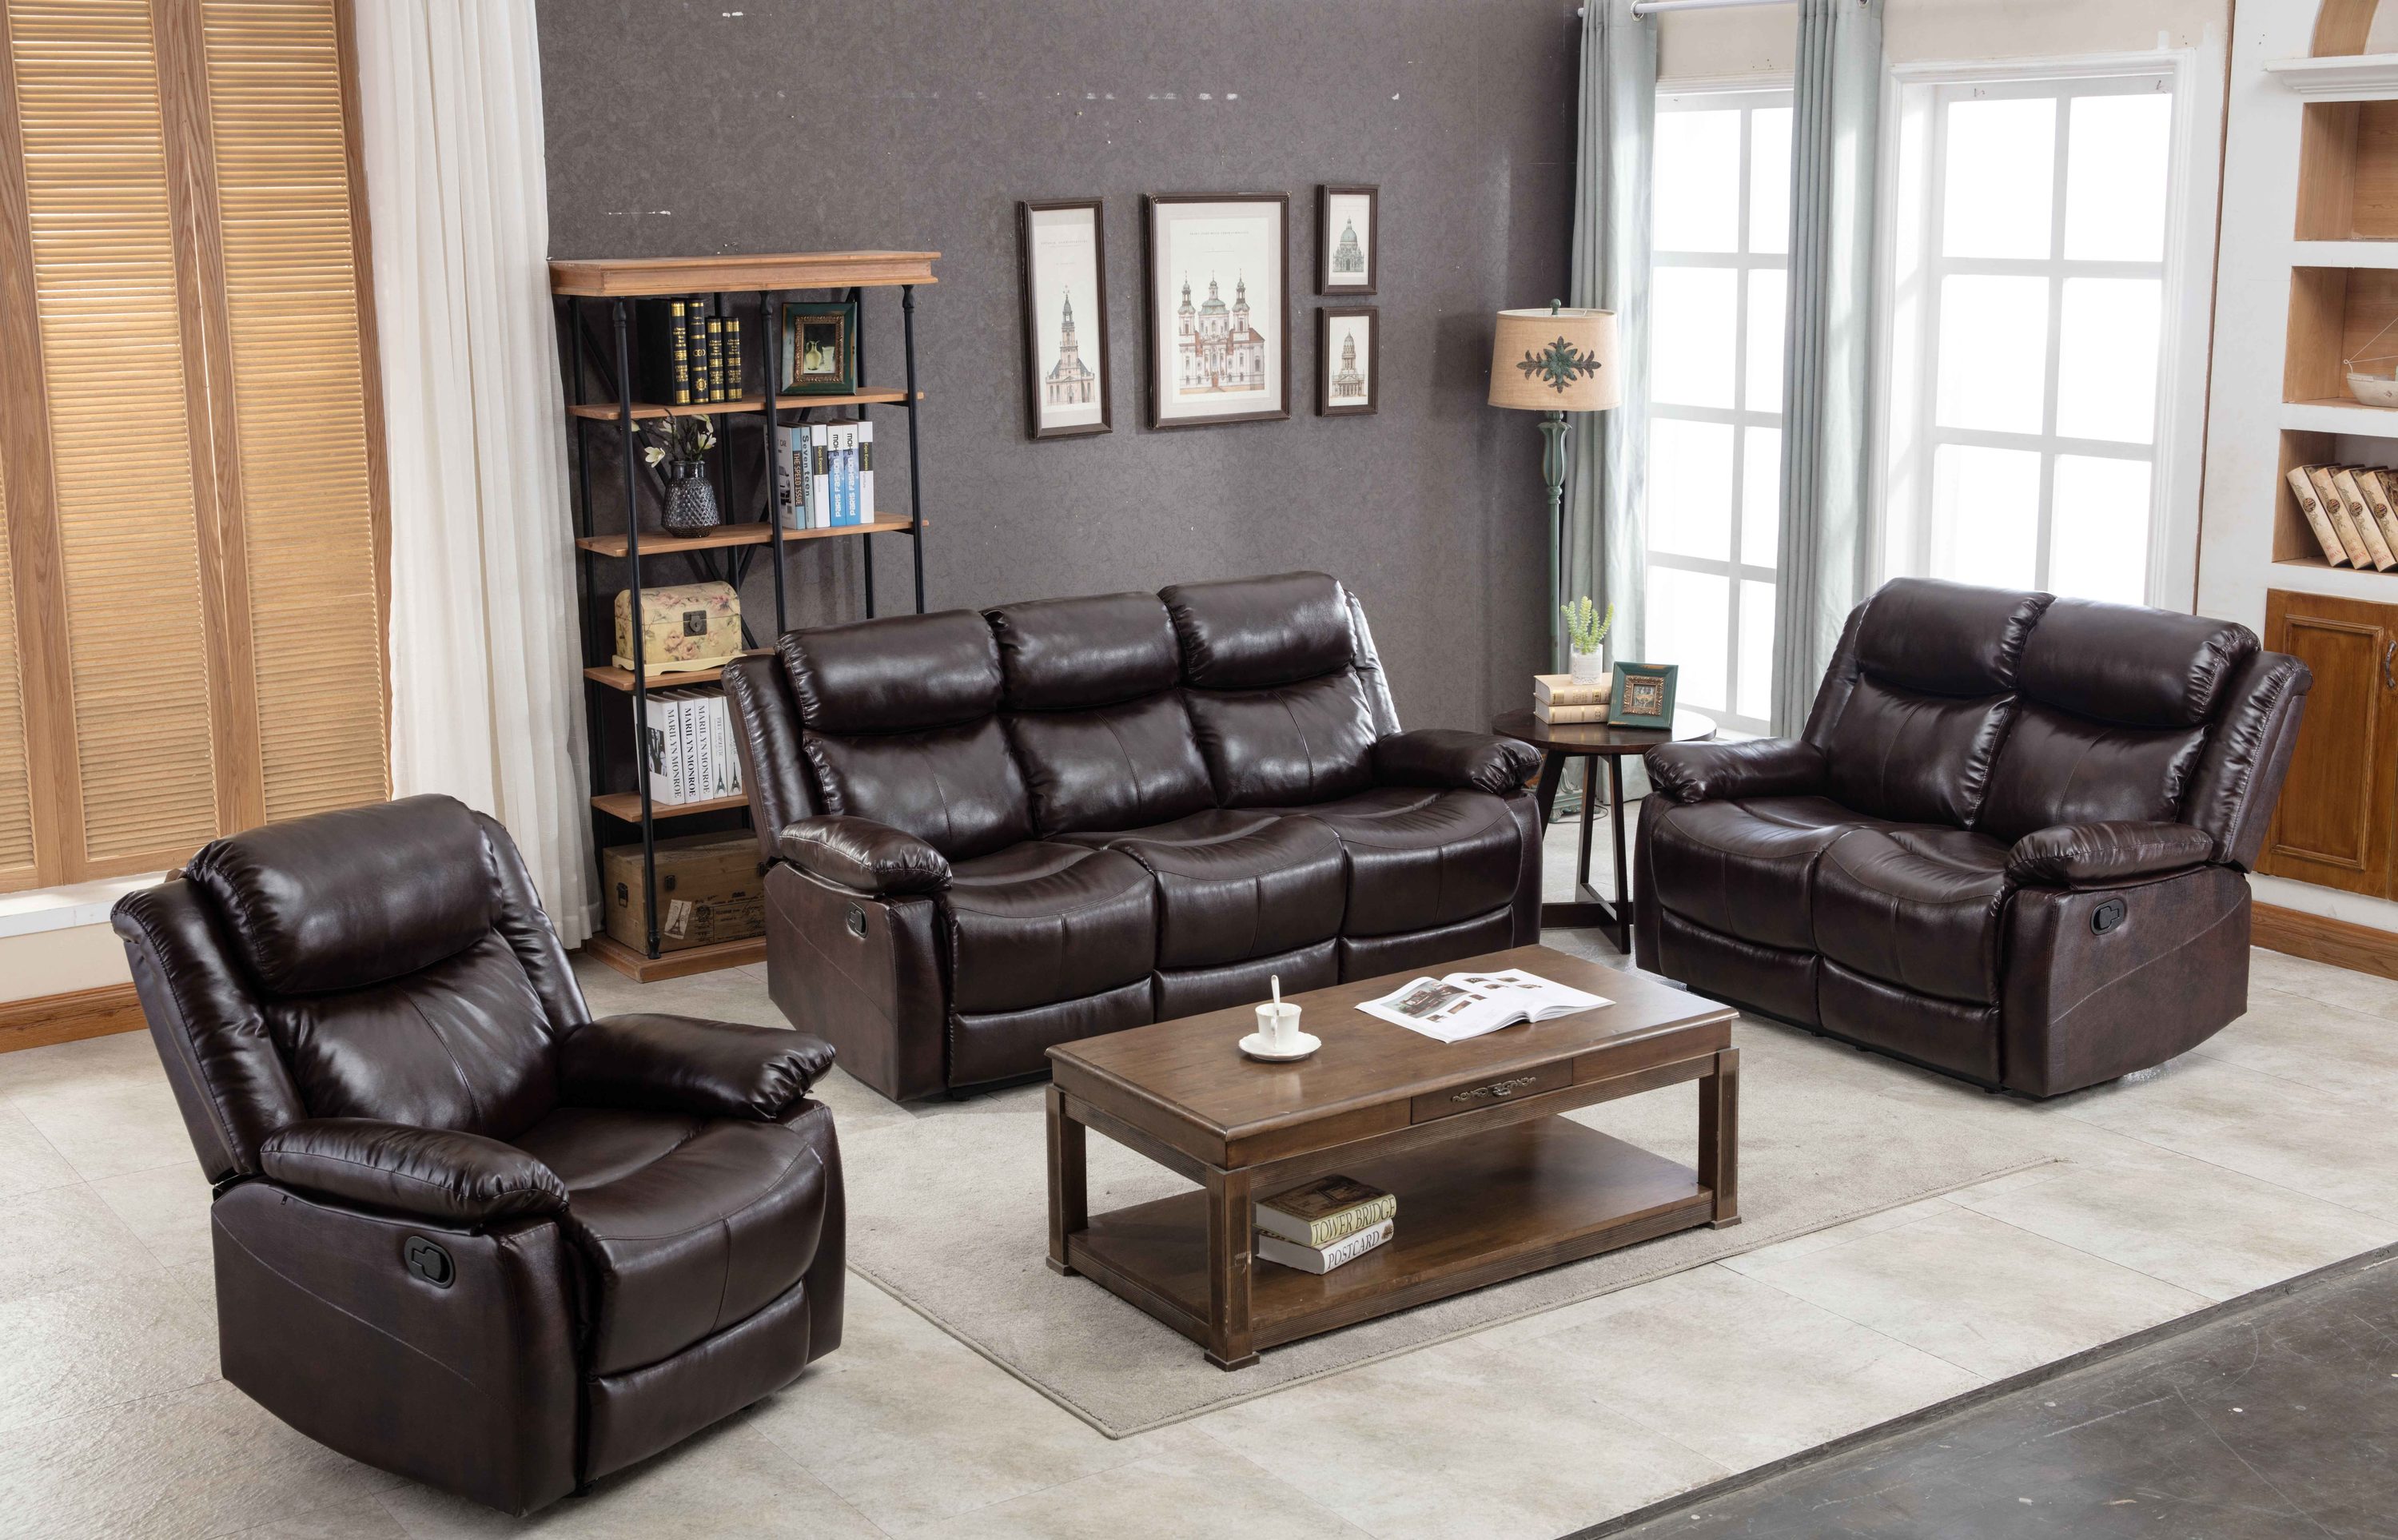 Leather Recliner Sofa Set Sectional 3+2+1 Seater Chaise Loveseat Couch Furniture 